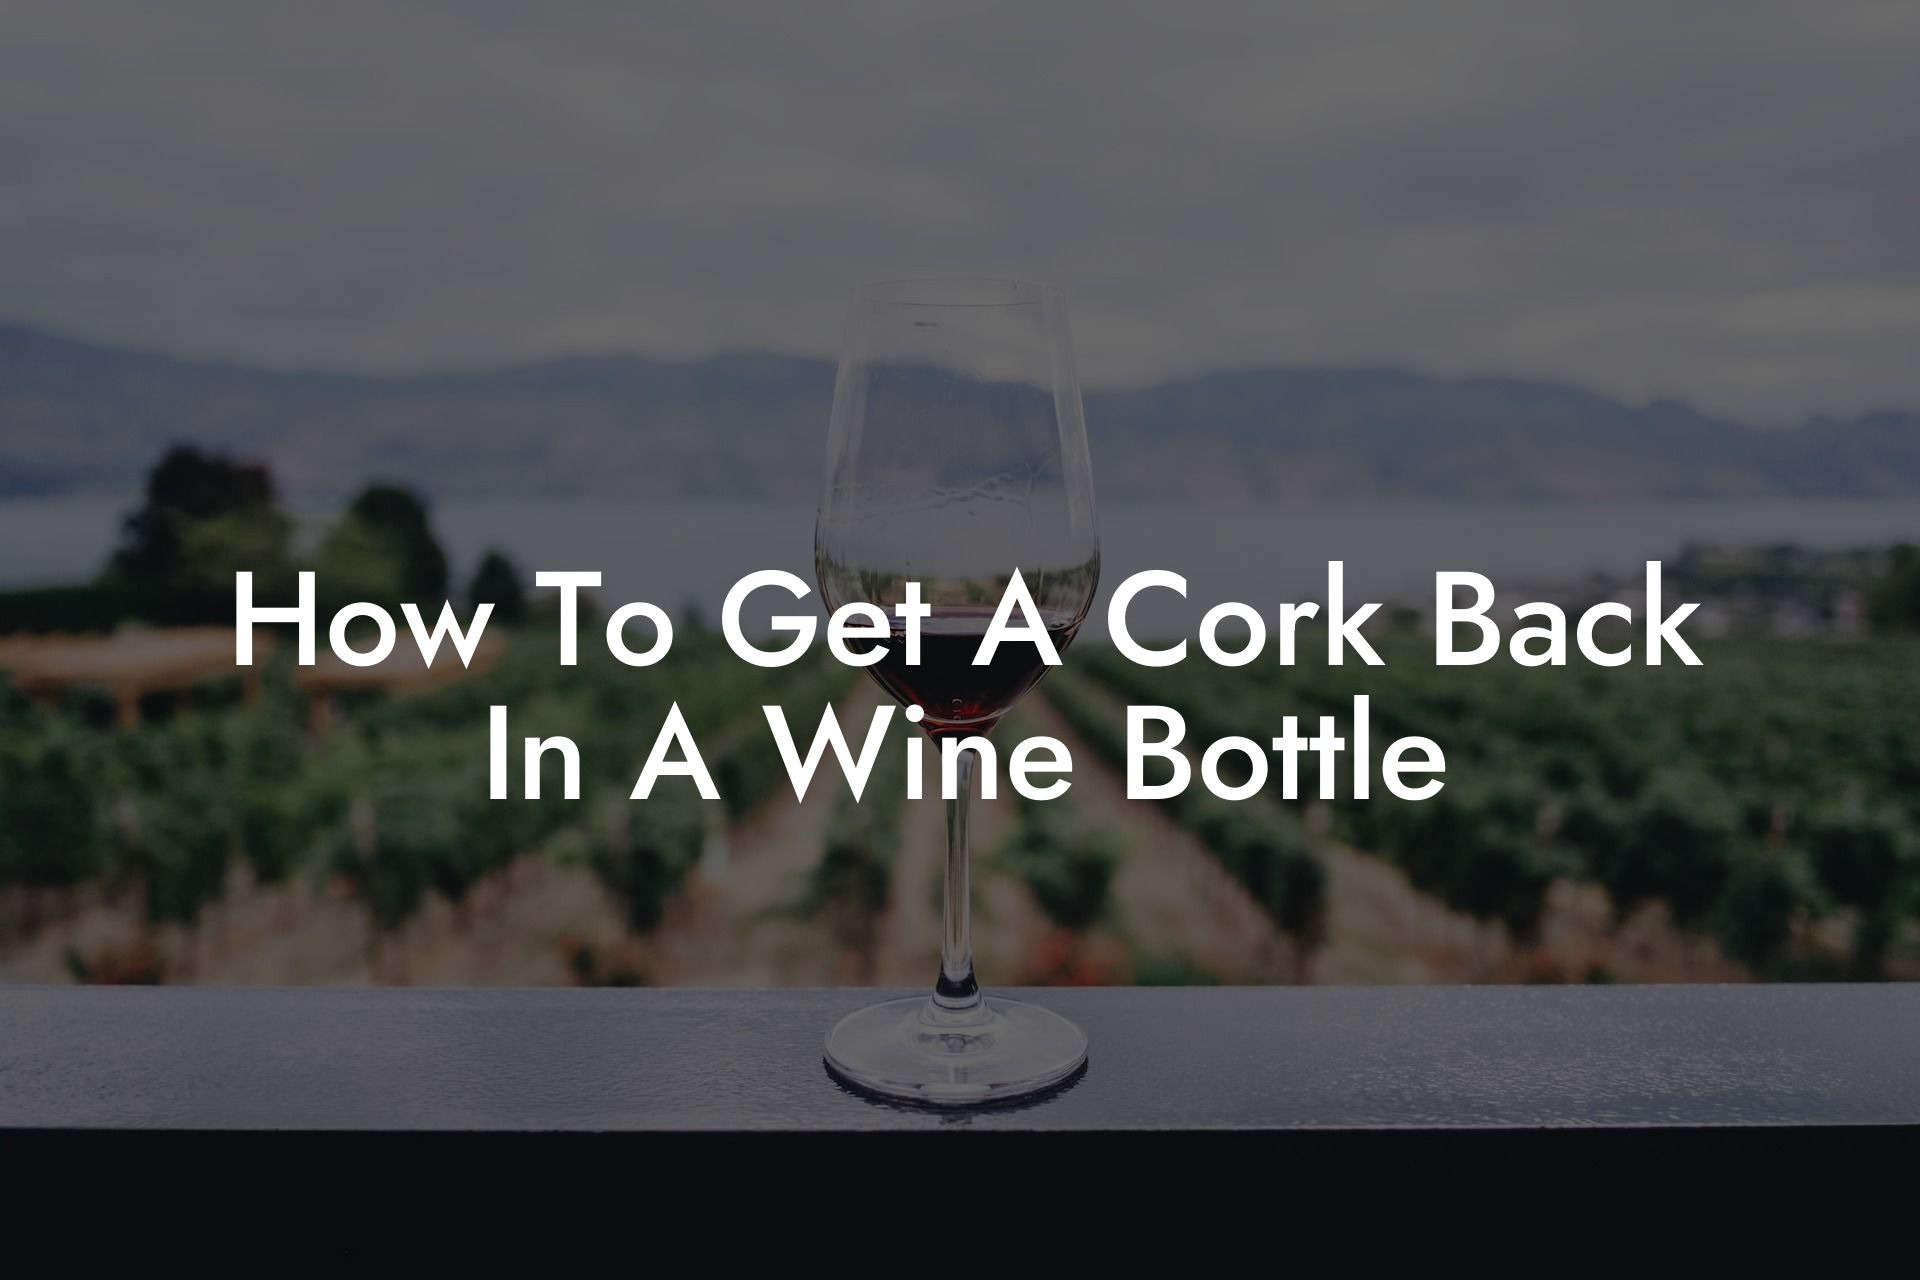 How To Get A Cork Back In A Wine Bottle